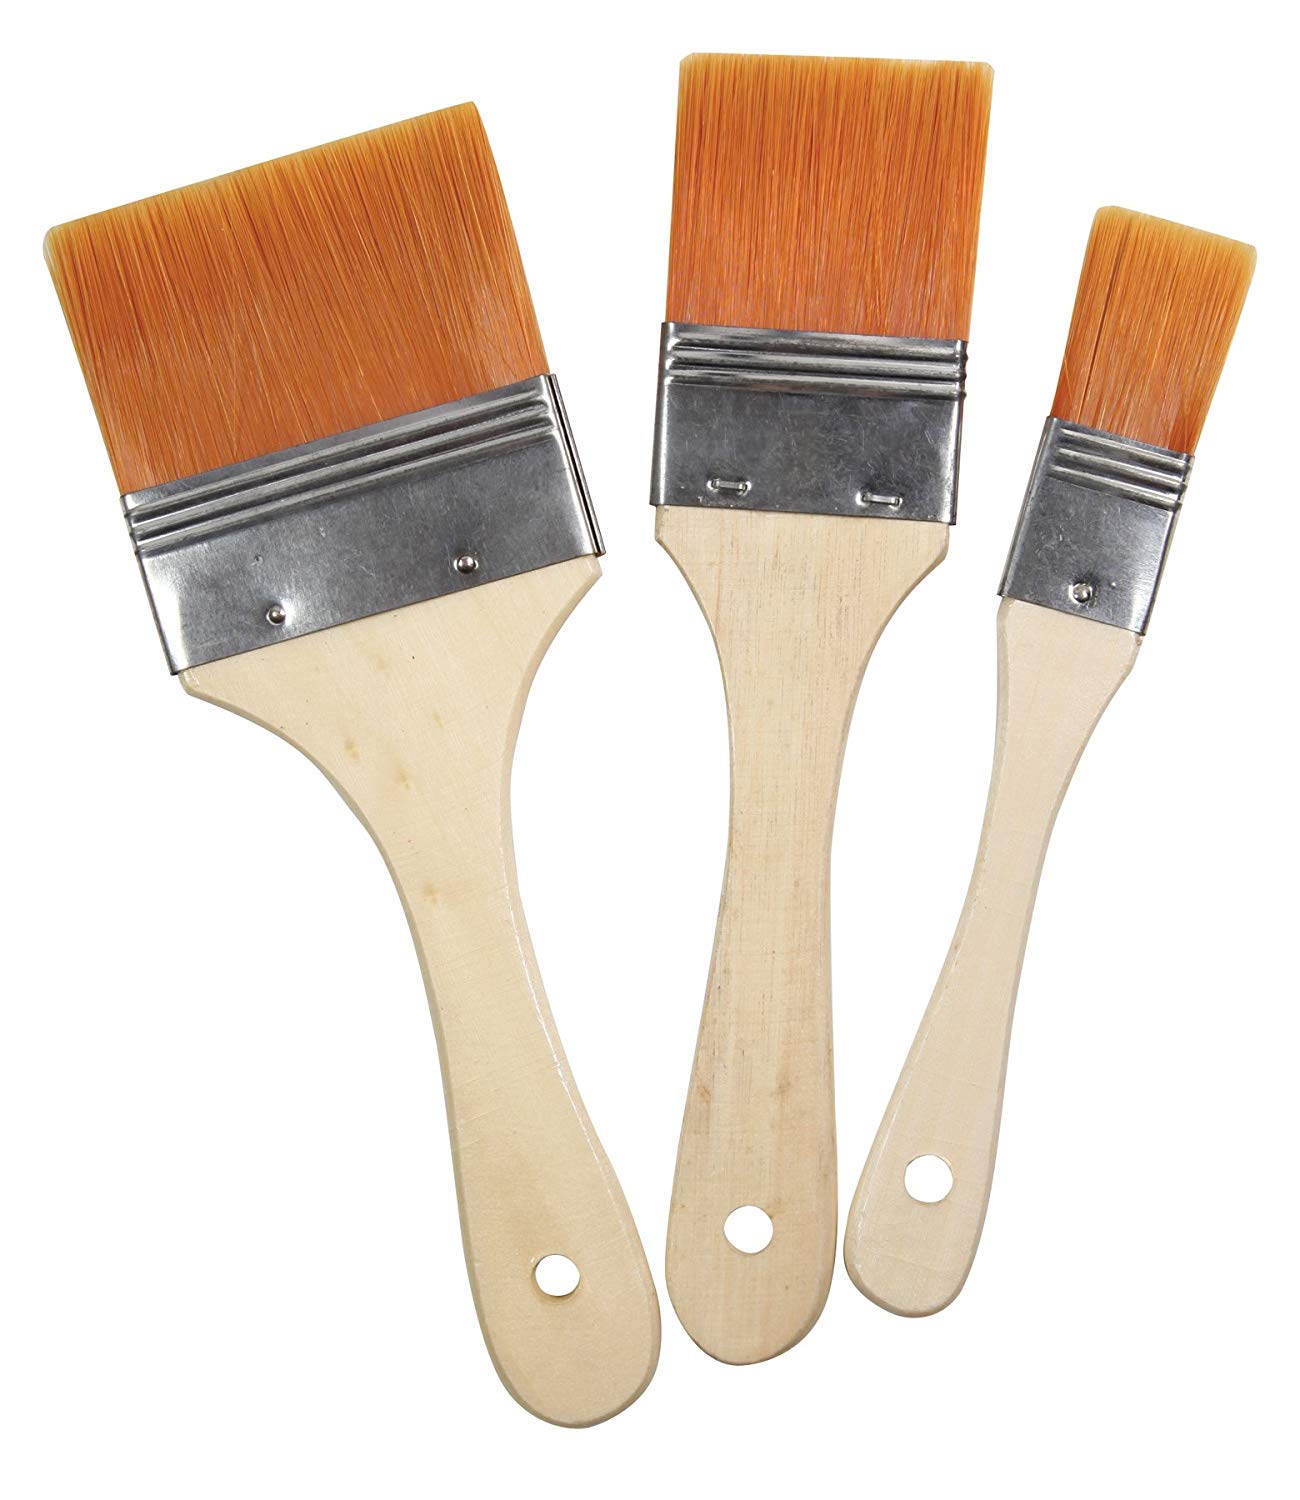 Keep Smiling Professional Gesso Brushes Flat Tip -3pcs - 2,4,6